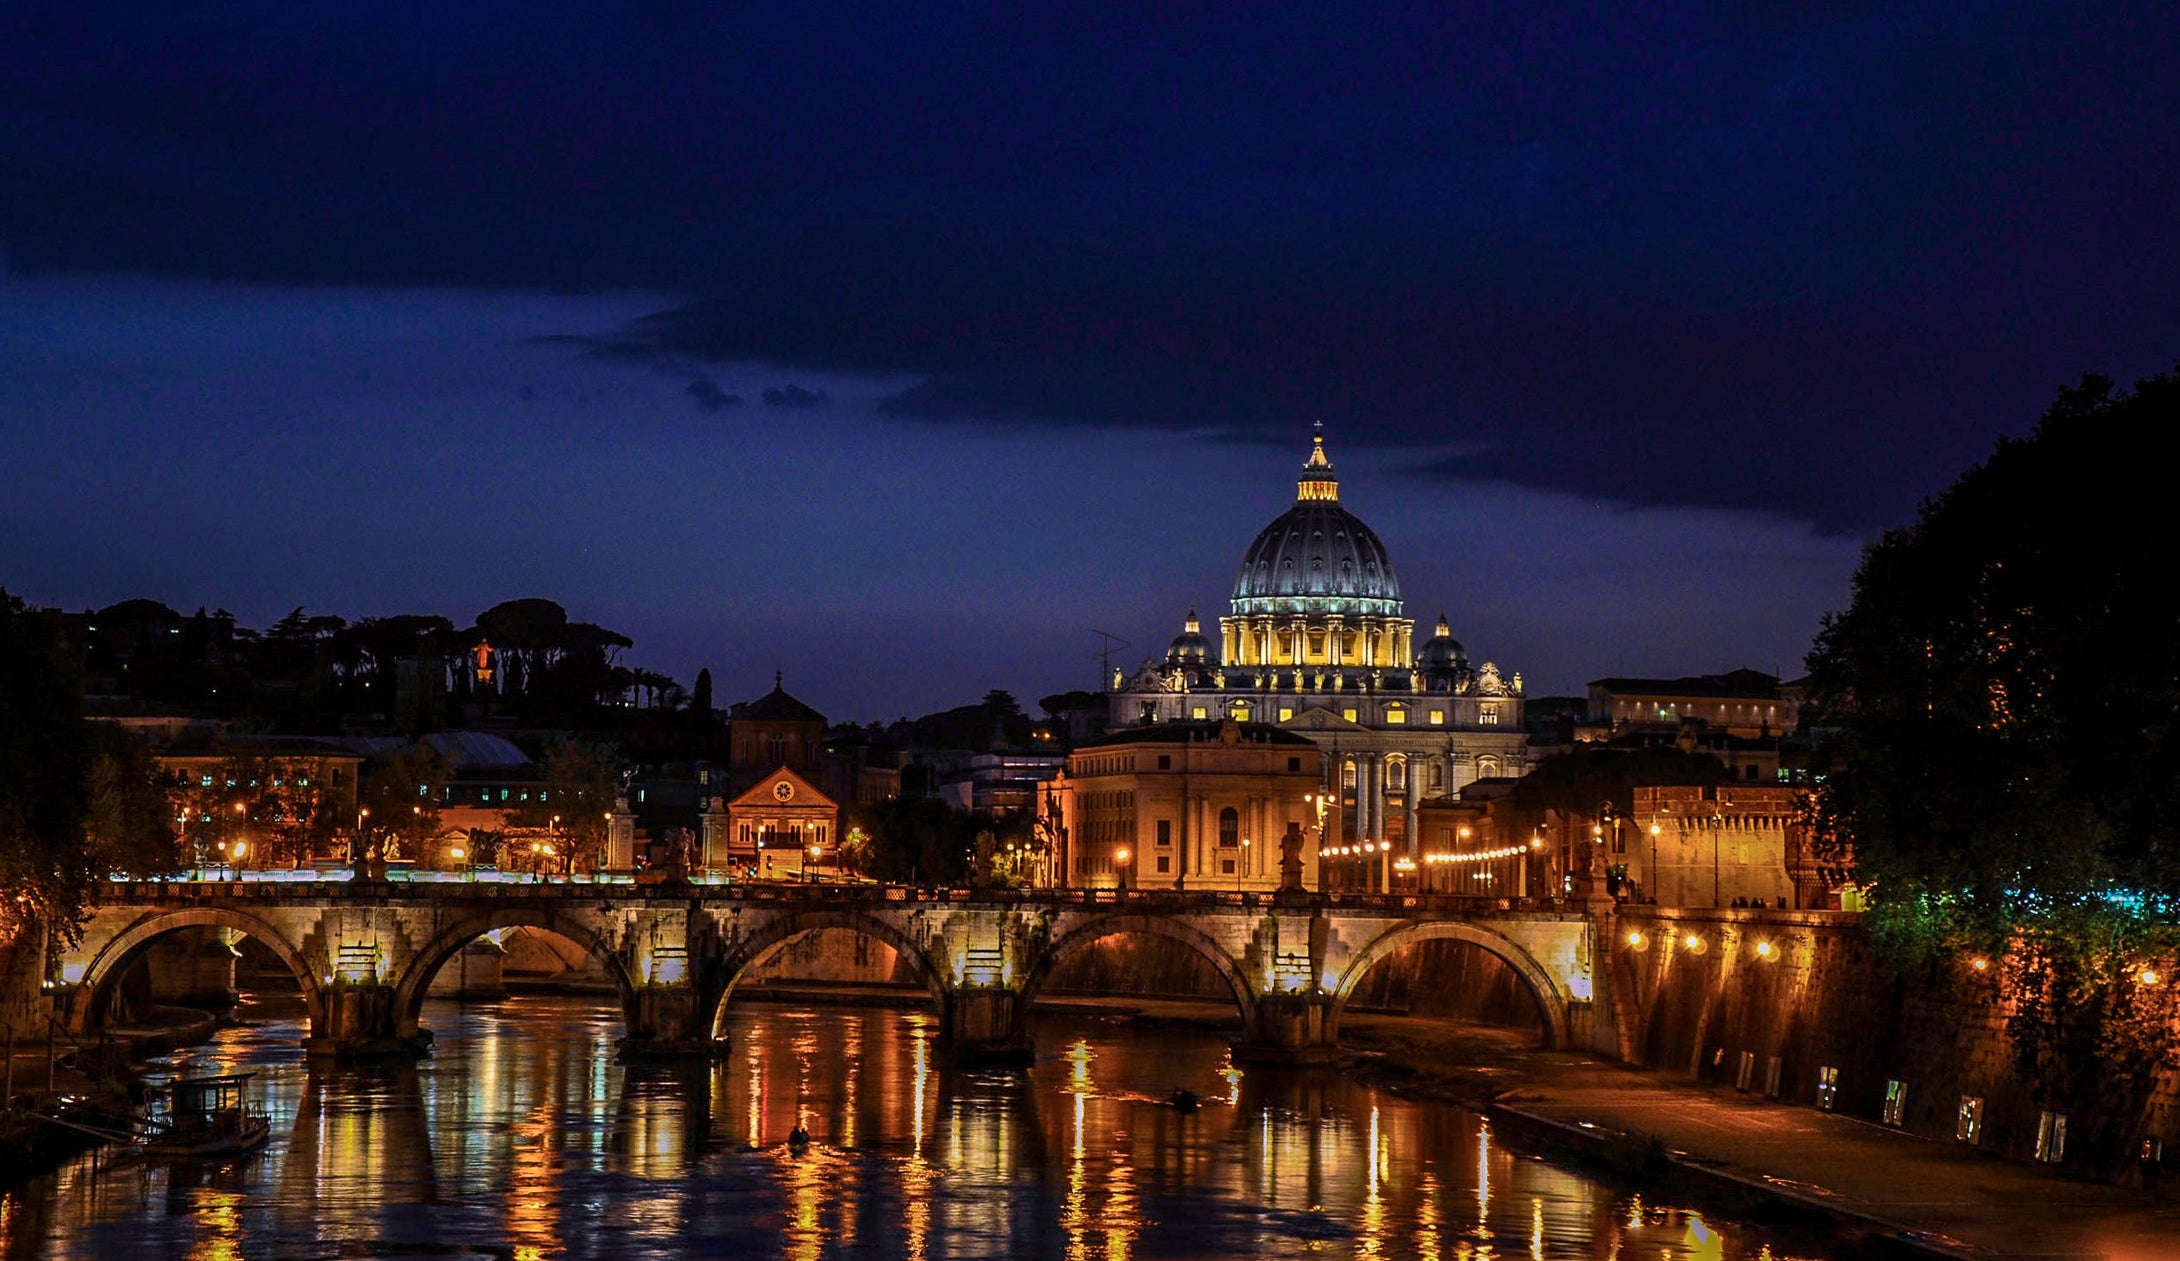 Starry Nights Over Rome: Capturing Eternal Romance Tracy McCrackin Photography Wall art - Tracy McCrackin Photography